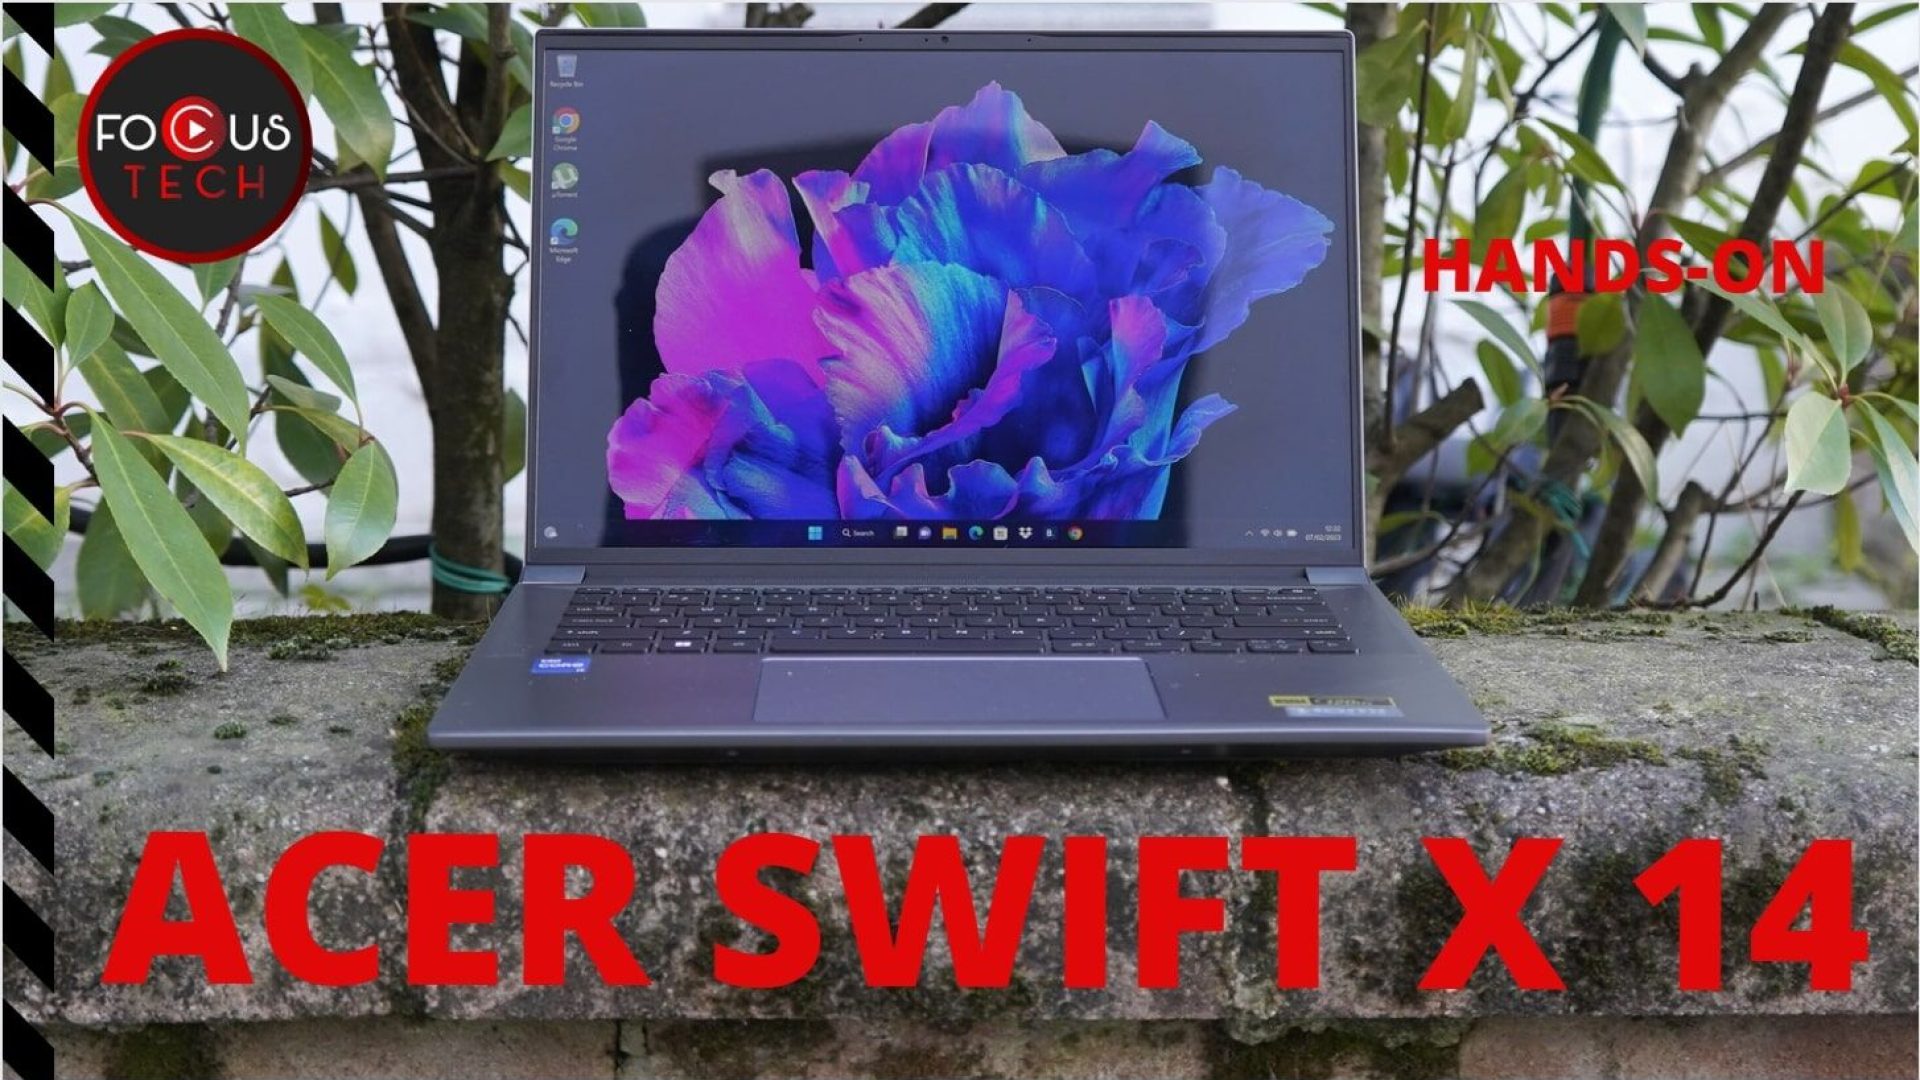 Acer Swift X 14: hands-on del notebook con display OLED